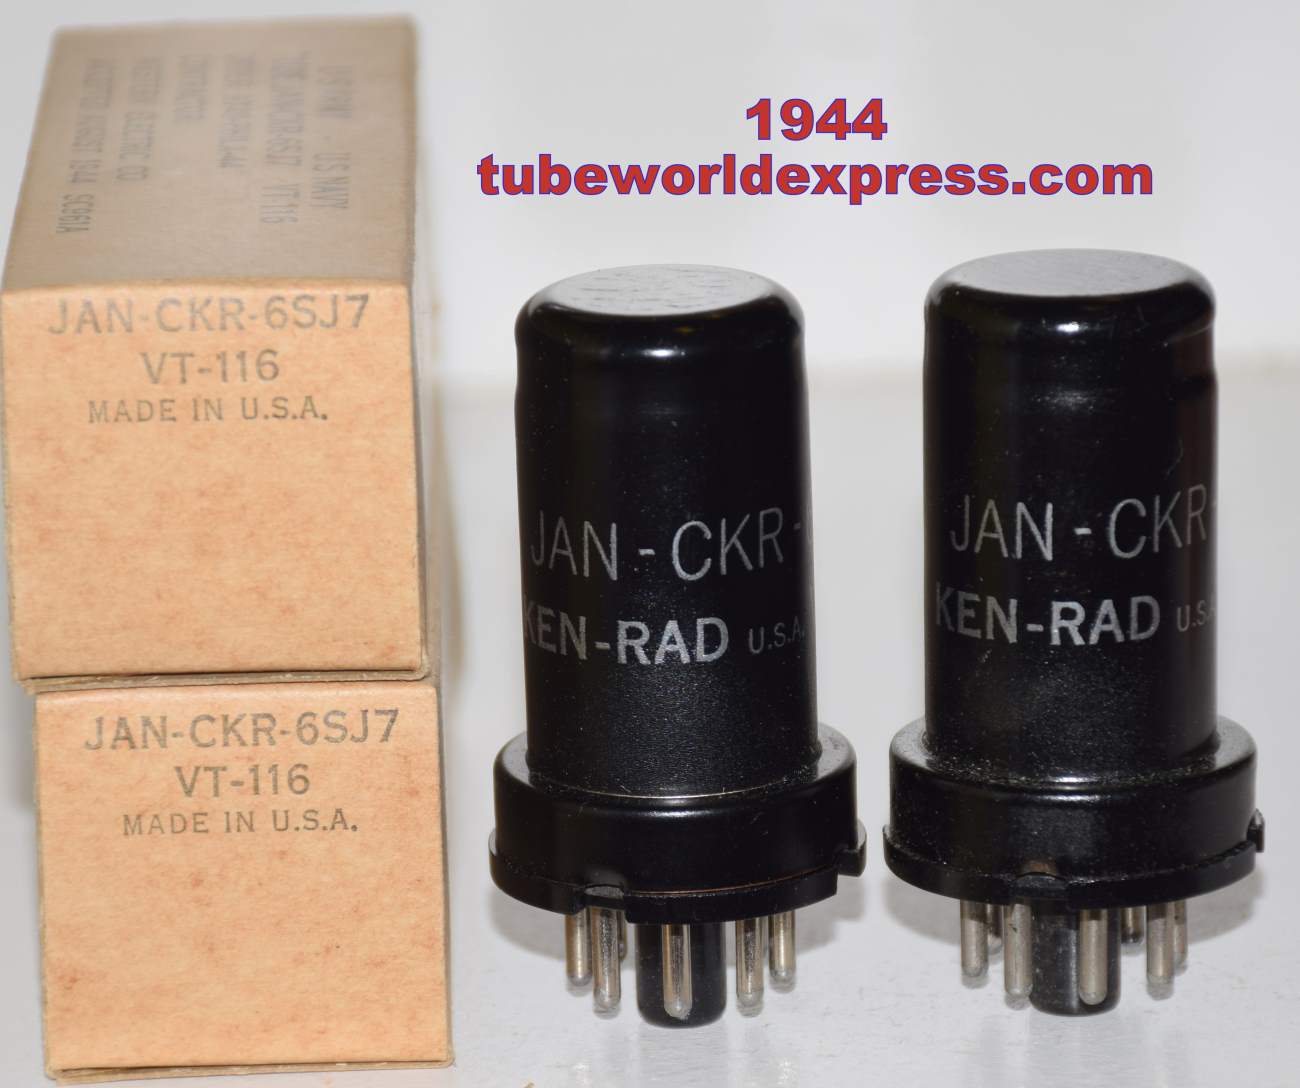 (!!!) (Recommended Pair) JAN-CKR-6SJ7 Ken Rad metal can NOS 1944 (2.5ma and  2.5ma) 1-2% matched